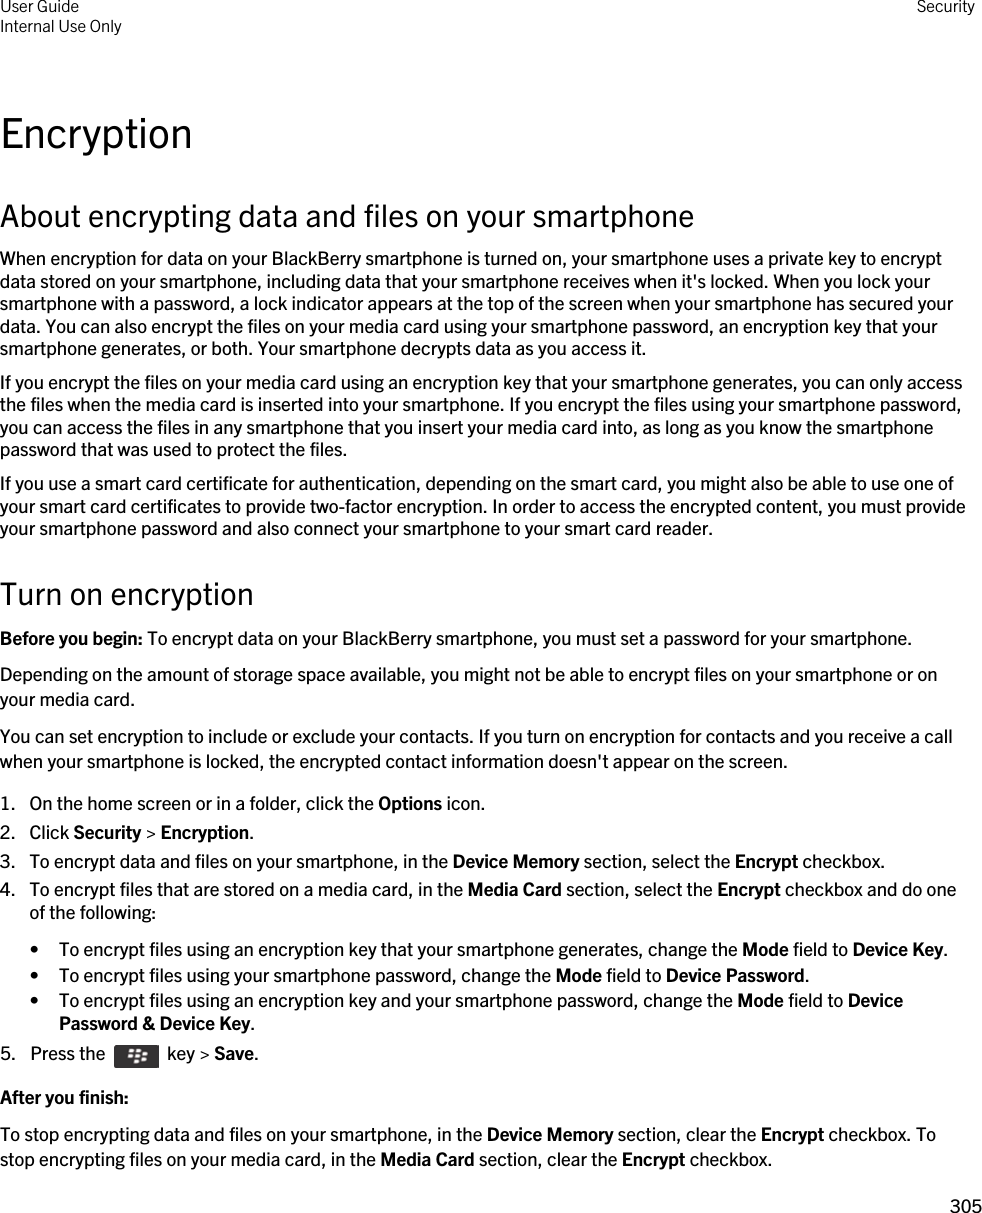 EncryptionAbout encrypting data and files on your smartphoneWhen encryption for data on your BlackBerry smartphone is turned on, your smartphone uses a private key to encrypt data stored on your smartphone, including data that your smartphone receives when it&apos;s locked. When you lock your smartphone with a password, a lock indicator appears at the top of the screen when your smartphone has secured your data. You can also encrypt the files on your media card using your smartphone password, an encryption key that your smartphone generates, or both. Your smartphone decrypts data as you access it.If you encrypt the files on your media card using an encryption key that your smartphone generates, you can only access the files when the media card is inserted into your smartphone. If you encrypt the files using your smartphone password, you can access the files in any smartphone that you insert your media card into, as long as you know the smartphone password that was used to protect the files.If you use a smart card certificate for authentication, depending on the smart card, you might also be able to use one of your smart card certificates to provide two-factor encryption. In order to access the encrypted content, you must provide your smartphone password and also connect your smartphone to your smart card reader.Turn on encryptionBefore you begin: To encrypt data on your BlackBerry smartphone, you must set a password for your smartphone.Depending on the amount of storage space available, you might not be able to encrypt files on your smartphone or on your media card.You can set encryption to include or exclude your contacts. If you turn on encryption for contacts and you receive a call when your smartphone is locked, the encrypted contact information doesn&apos;t appear on the screen.1. On the home screen or in a folder, click the Options icon.2. Click Security &gt; Encryption.3. To encrypt data and files on your smartphone, in the Device Memory section, select the Encrypt checkbox.4. To encrypt files that are stored on a media card, in the Media Card section, select the Encrypt checkbox and do one of the following:• To encrypt files using an encryption key that your smartphone generates, change the Mode field to Device Key.• To encrypt files using your smartphone password, change the Mode field to Device Password.• To encrypt files using an encryption key and your smartphone password, change the Mode field to Device Password &amp; Device Key.5.  Press the    key &gt; Save. After you finish: To stop encrypting data and files on your smartphone, in the Device Memory section, clear the Encrypt checkbox. To stop encrypting files on your media card, in the Media Card section, clear the Encrypt checkbox.User GuideInternal Use Only Security305 